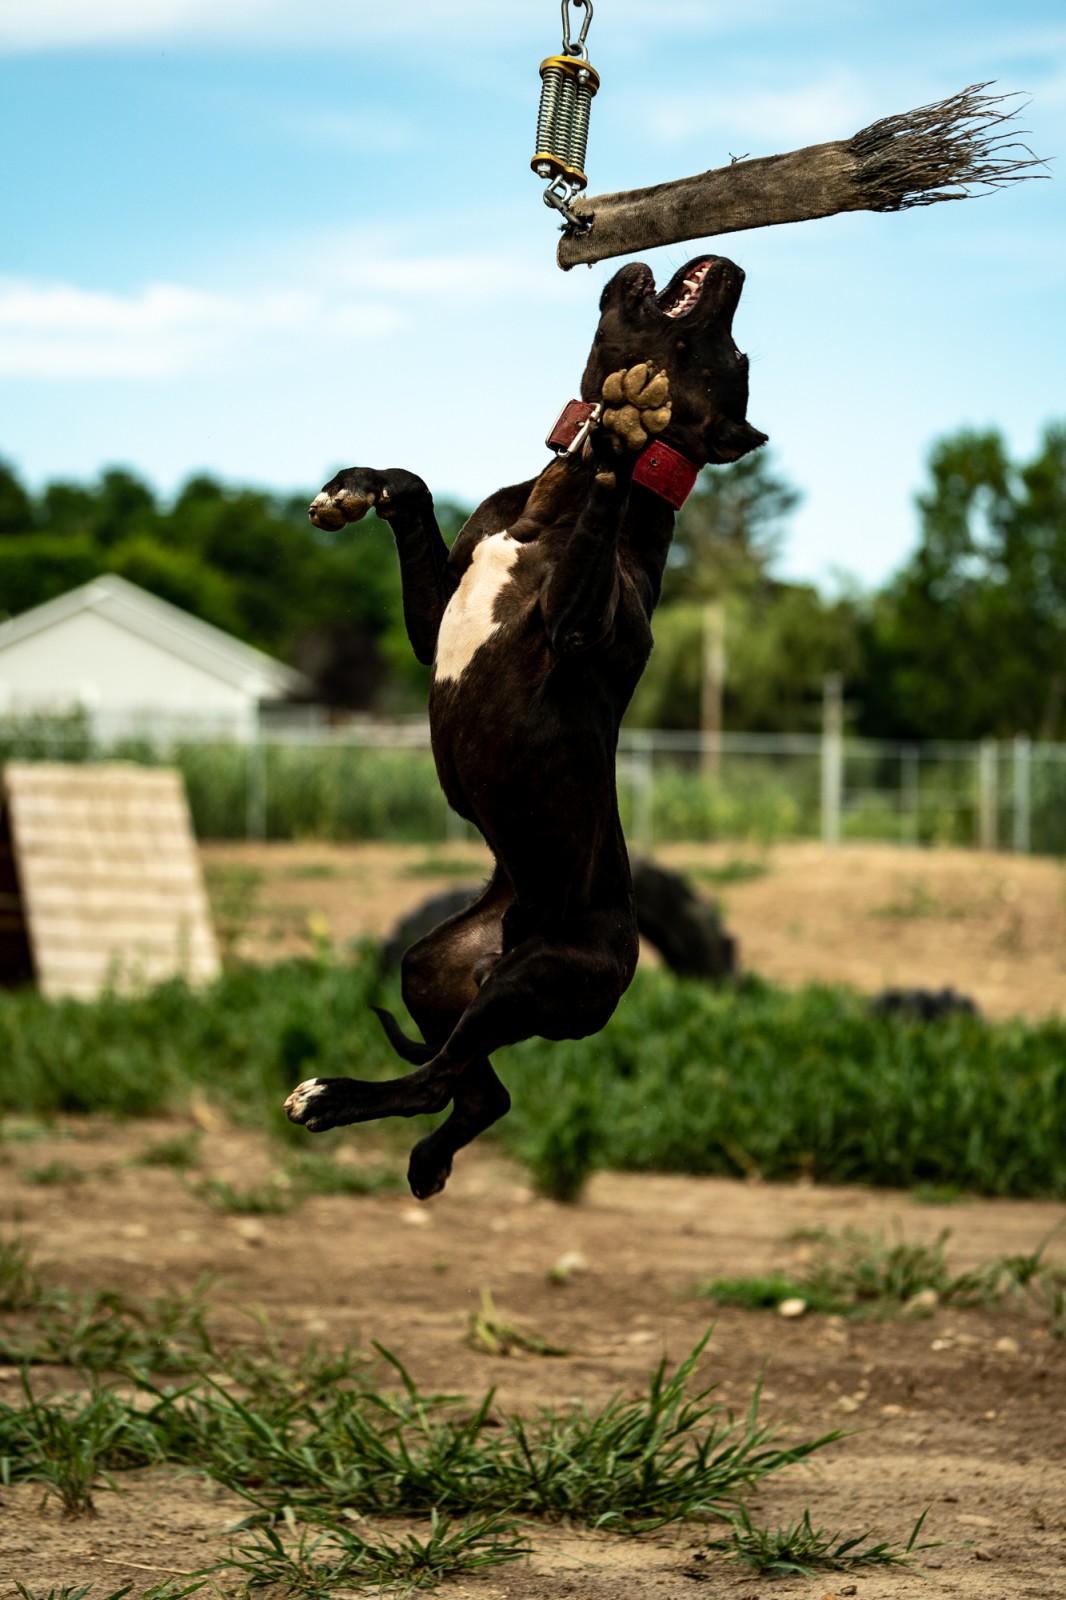 Unleashed Kennelz black XL pit bull, Butcher is caught midflight in an attempt to grab the spring pole.